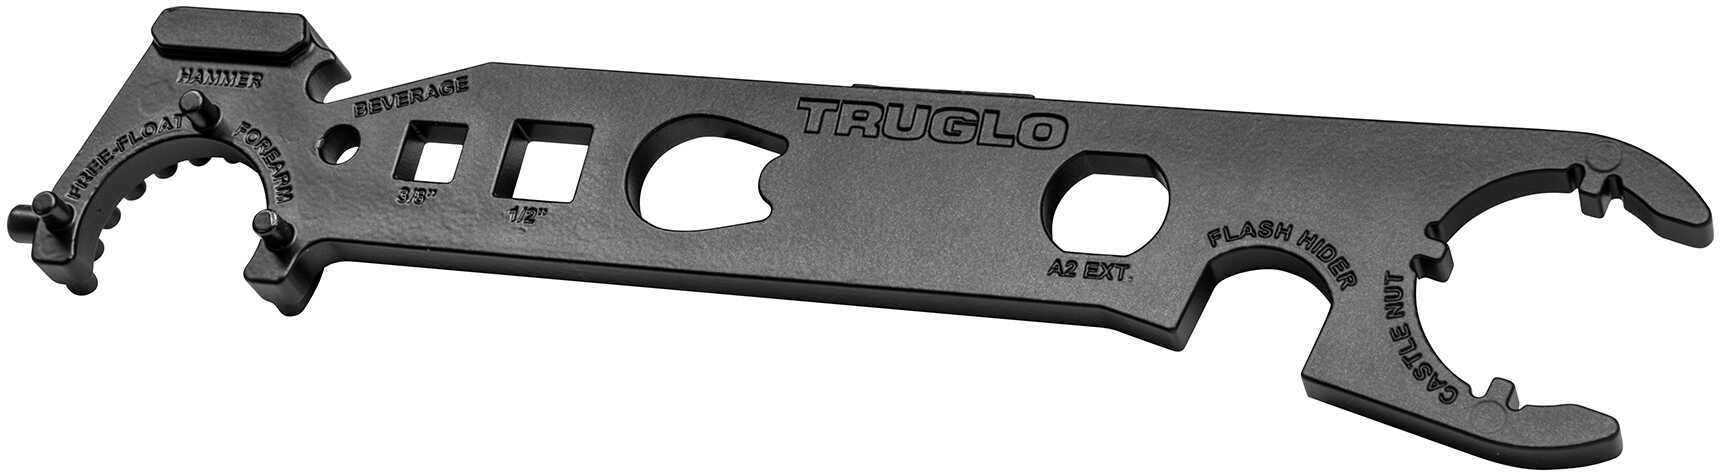 Truglo AR-15 Armorers Wrench/Multi-Tool-img-1